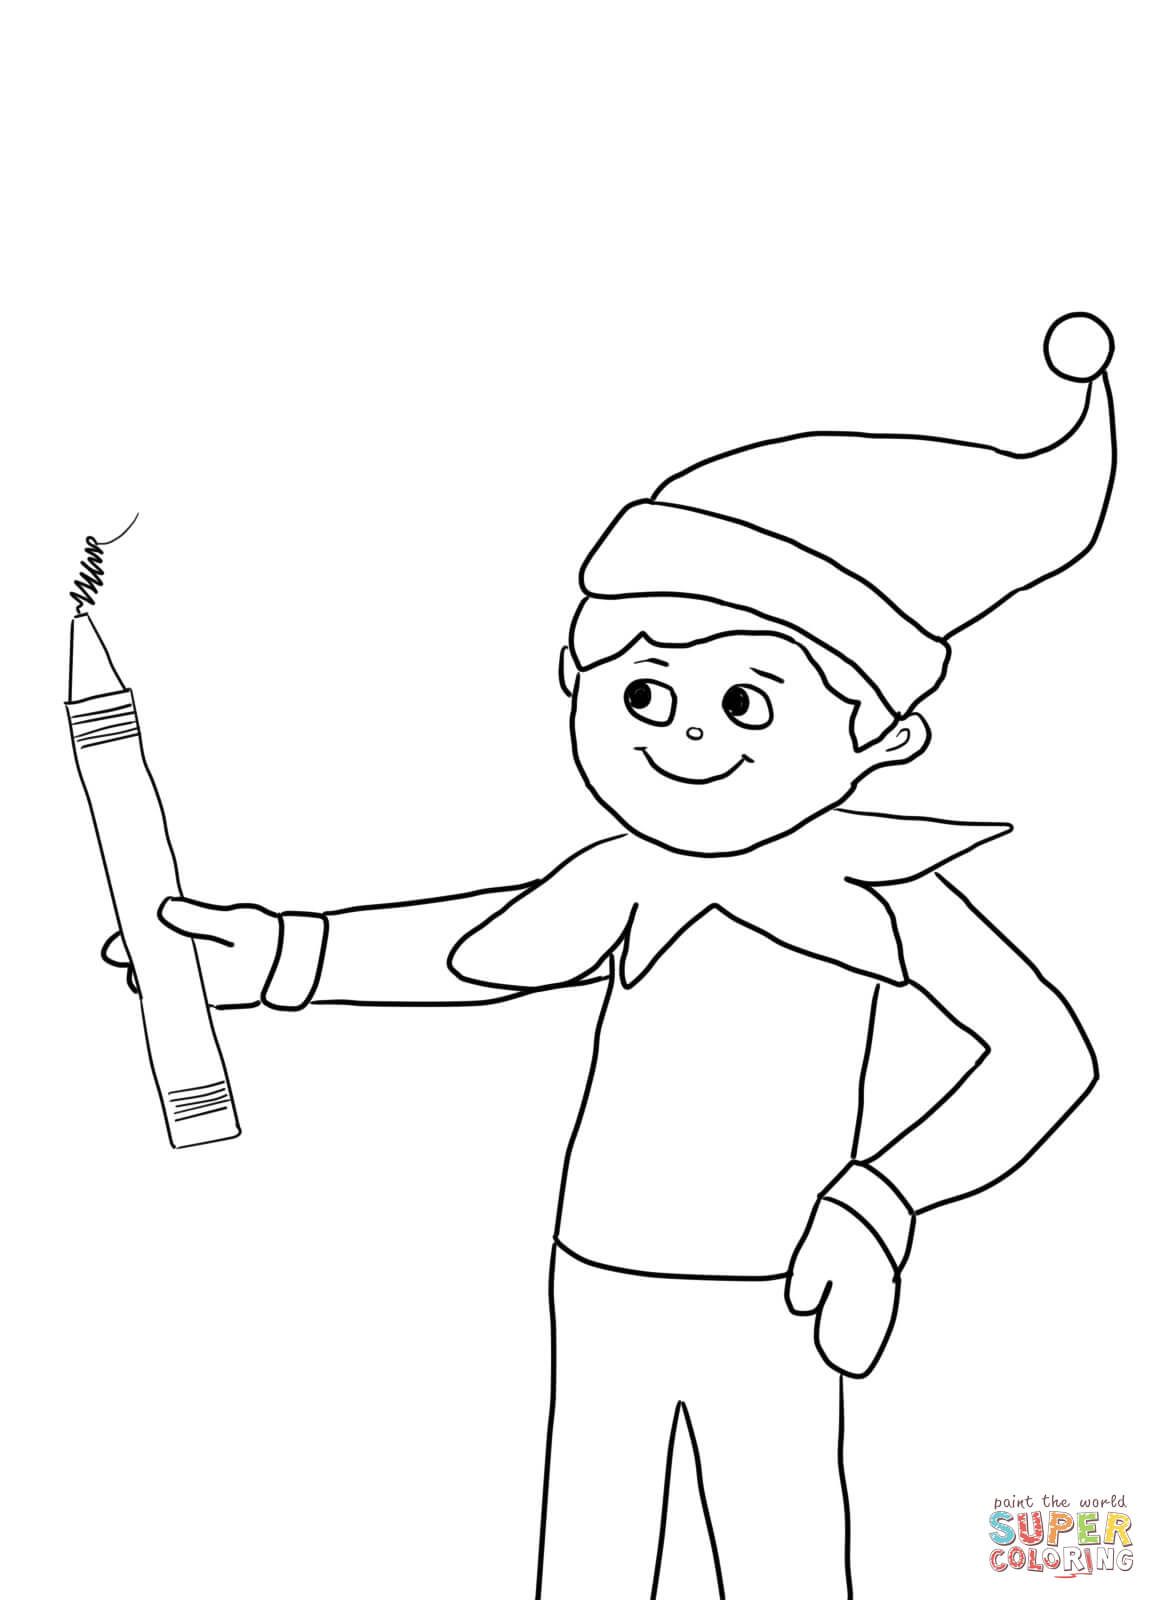 Elf on the Shelf with Pencil coloring page | Free Printable ...